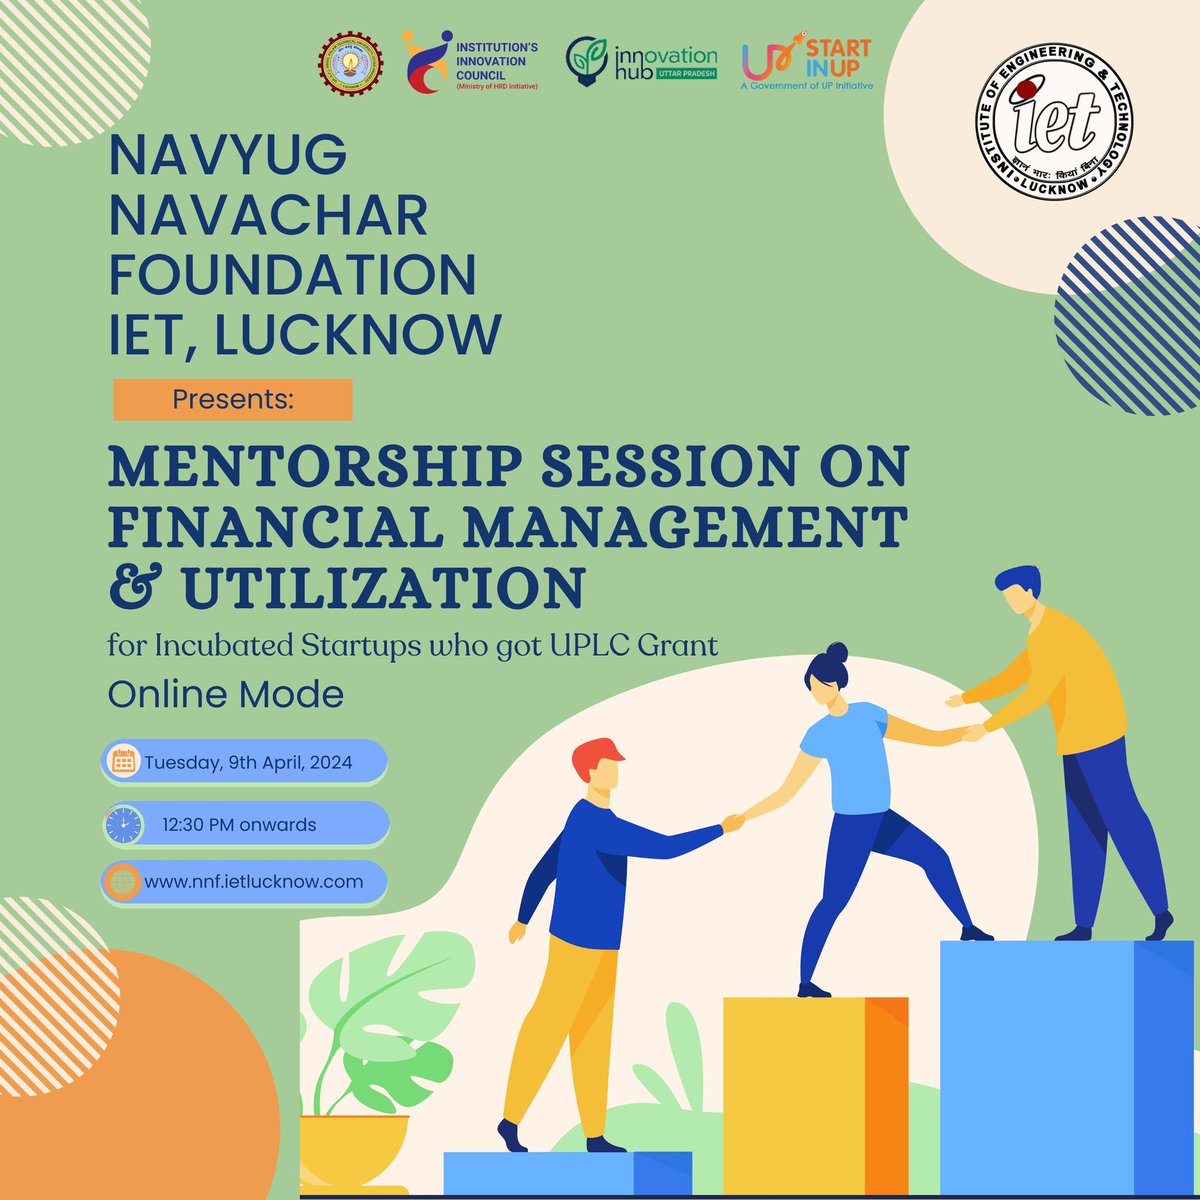 ULPC Grant Recipients! Maximize your funding with NNF's online Mentorship Session on Financial Management & Utilization on April 9th, 12: 30 PM. Learn effective financial practices & optimize resources @UPStartuppolicy @iet_lucknow @AKTU_Lucknow @Vineetkansal2 @InnovationHubUP